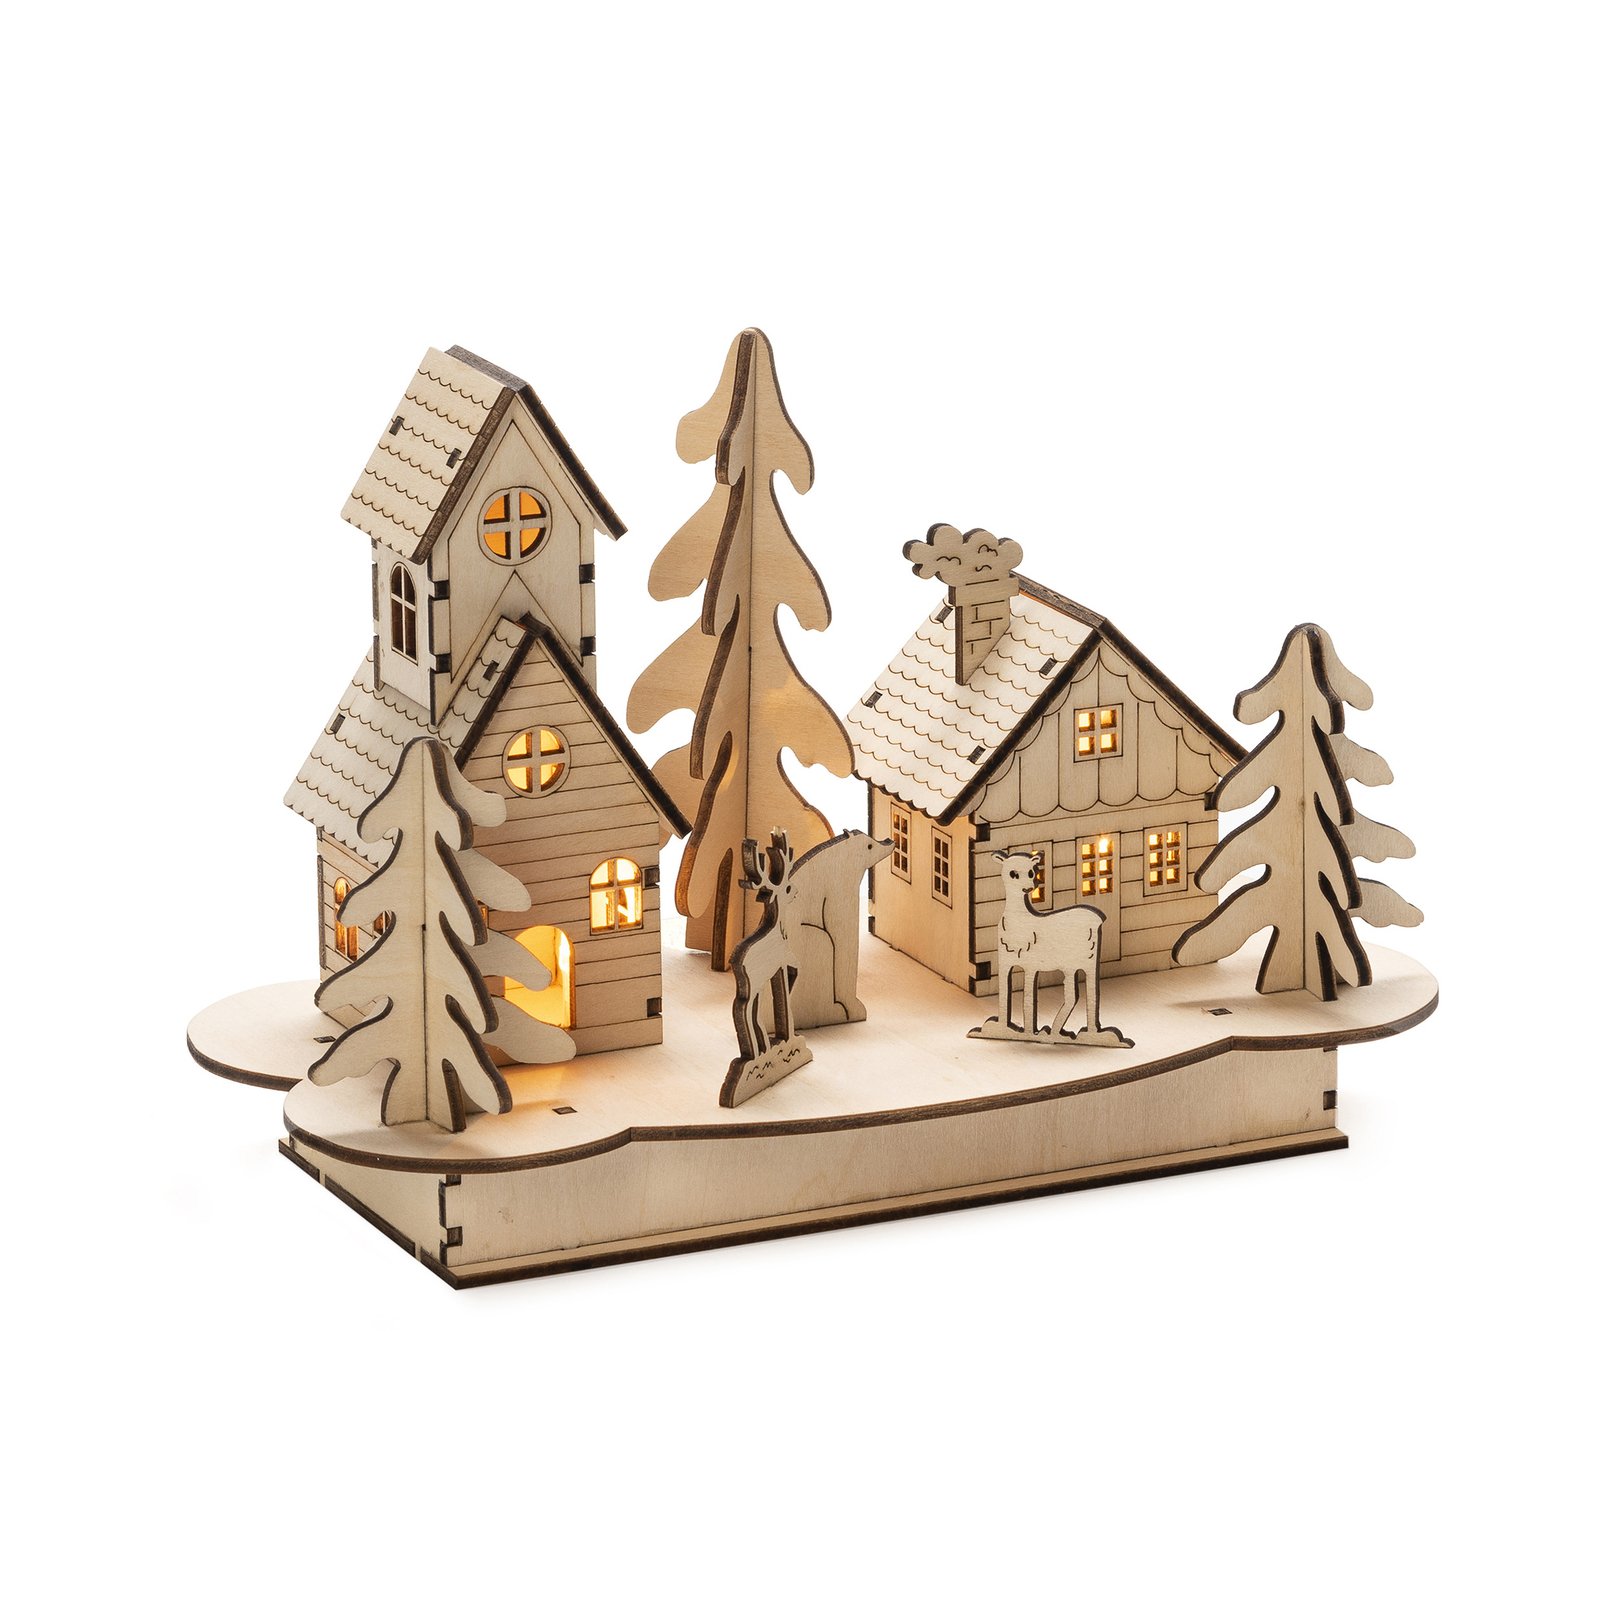 House and Animals LED candle arch